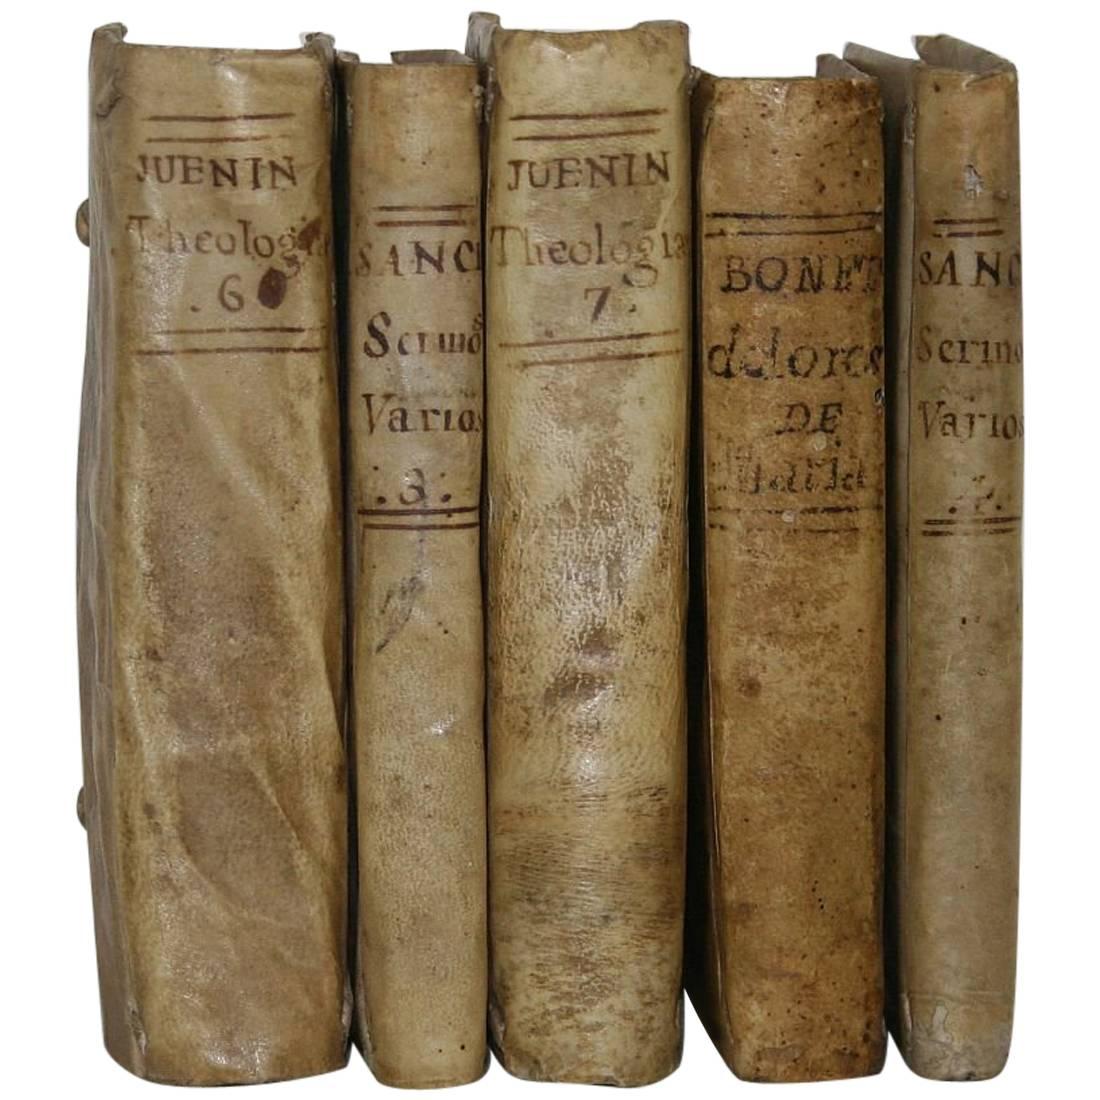 Great Collection of Five Italian/Spanish 18th Century Weathered Vellum Books